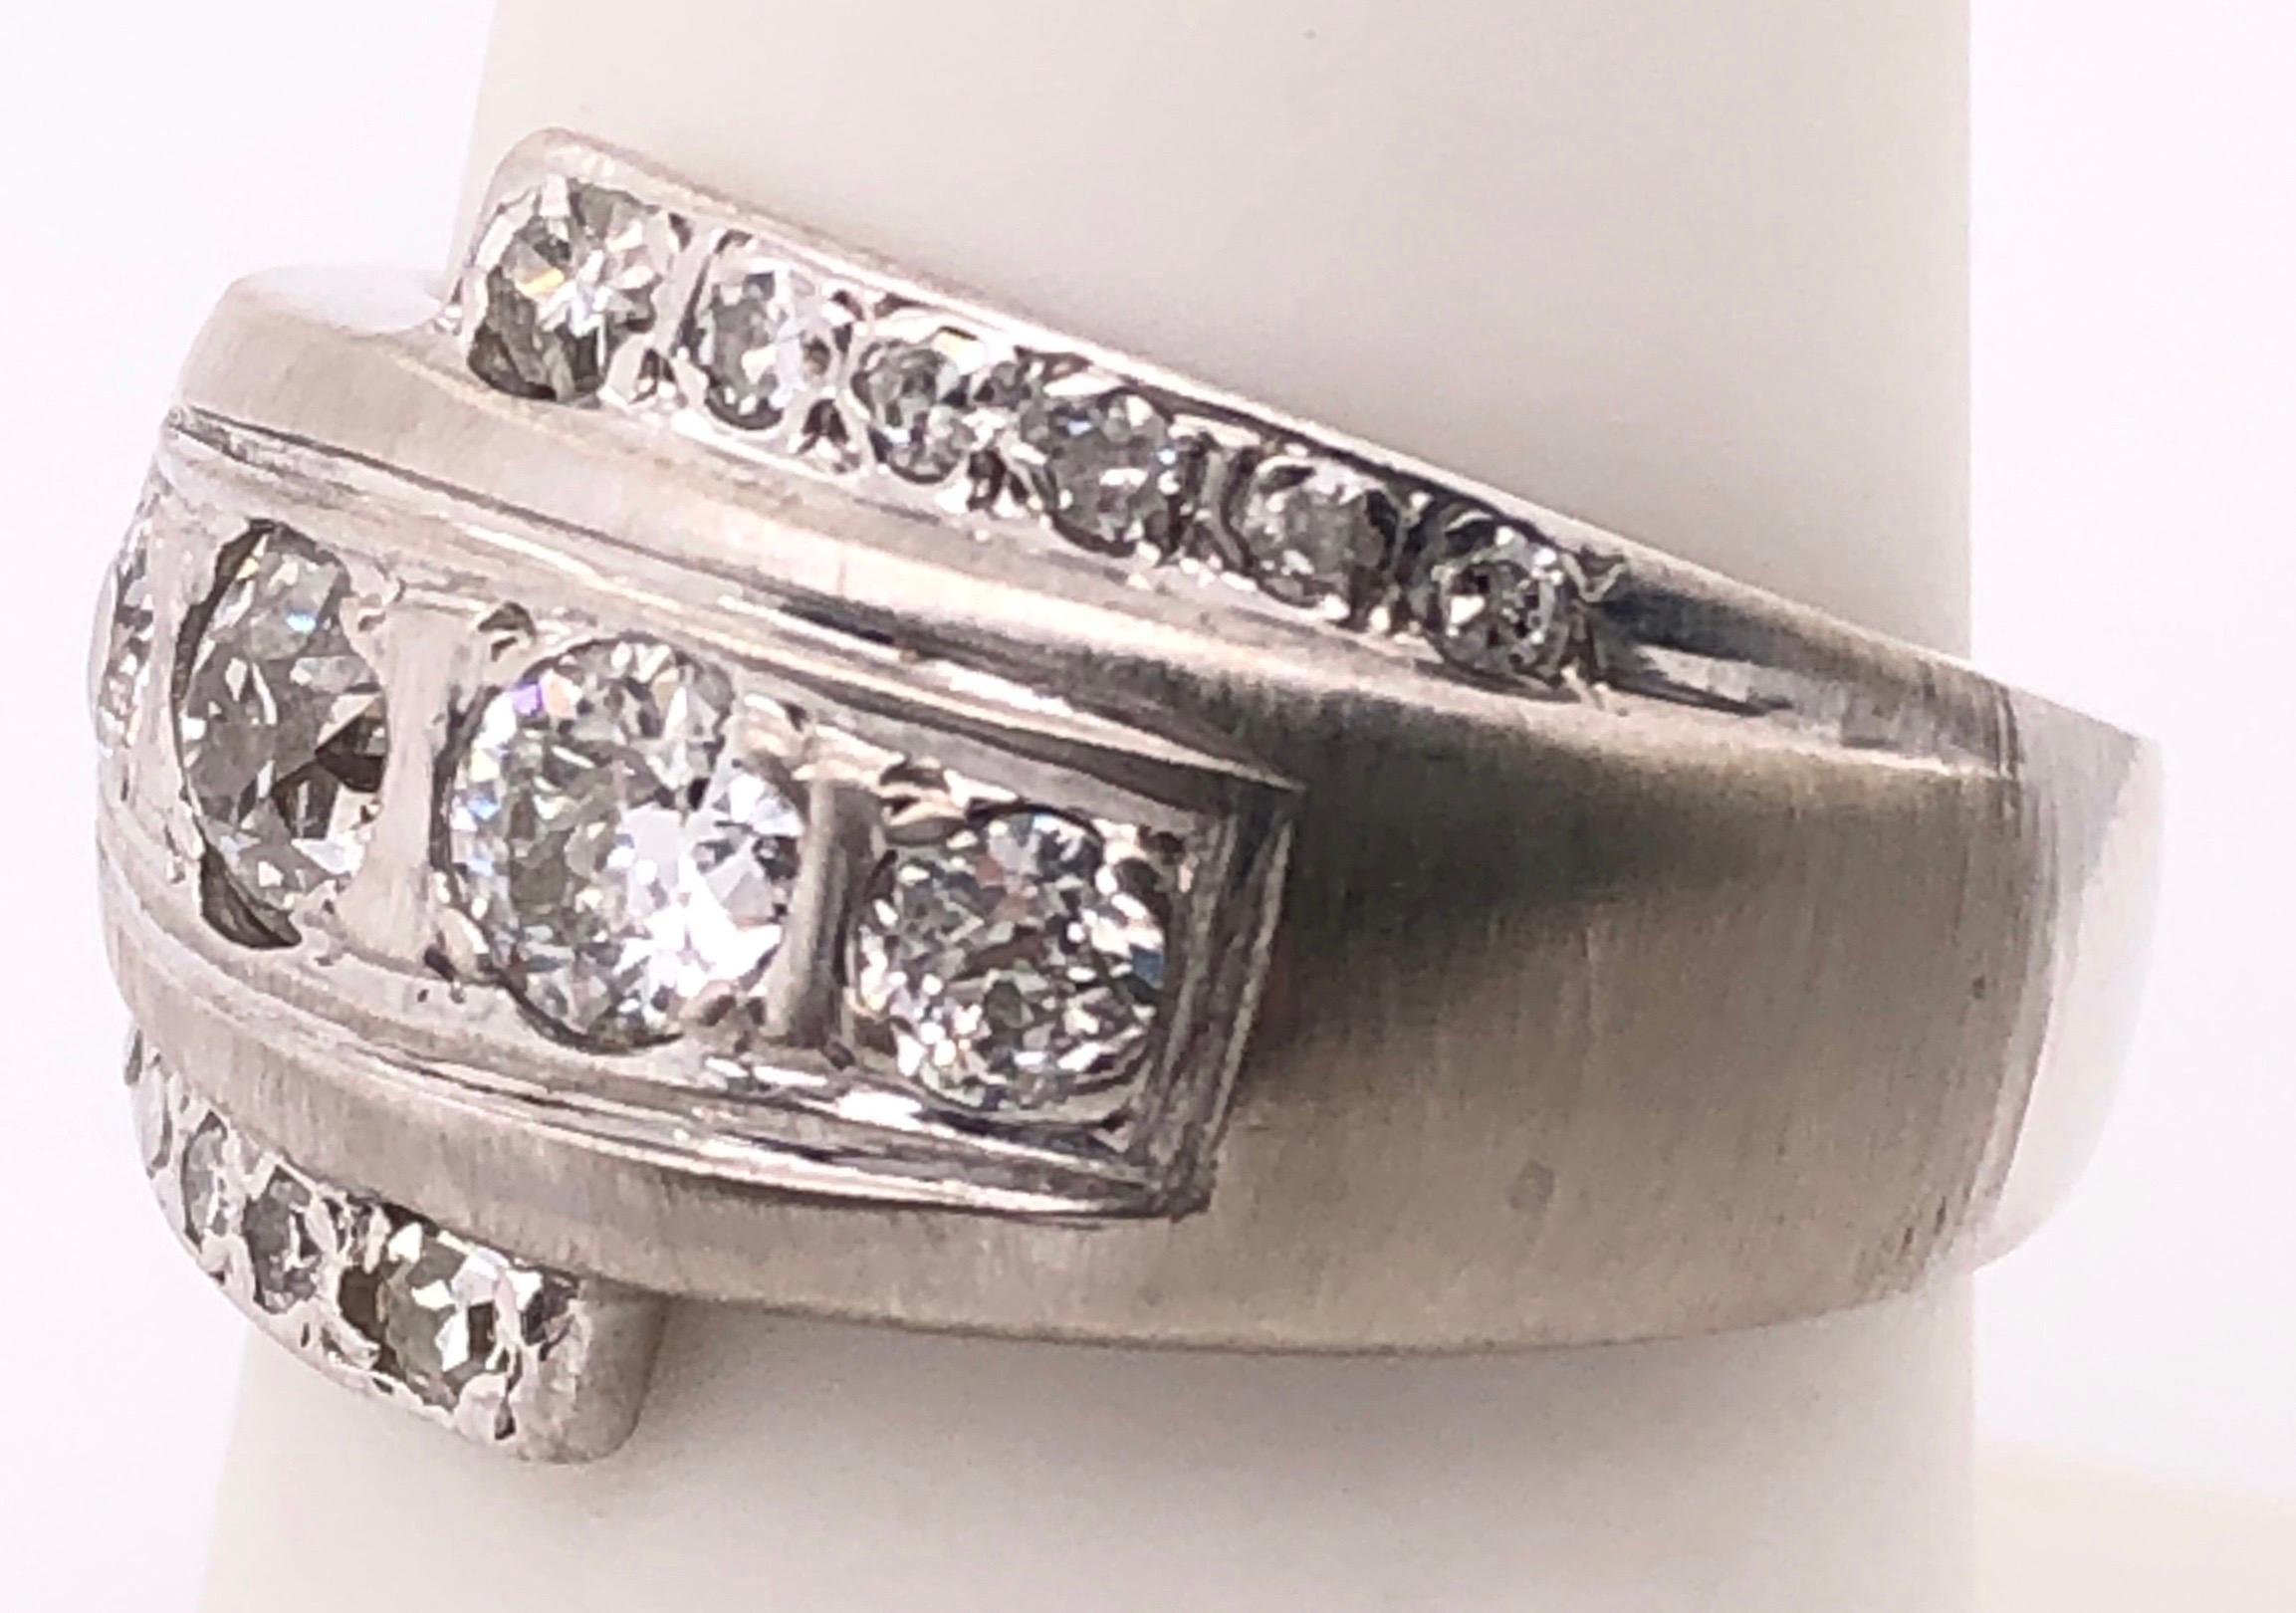 14 Karat White Gold Contemporary Ring with Round Diamonds 2.00 Total Diamond Weight.
Size 7.25
6.17 grams total weight.

